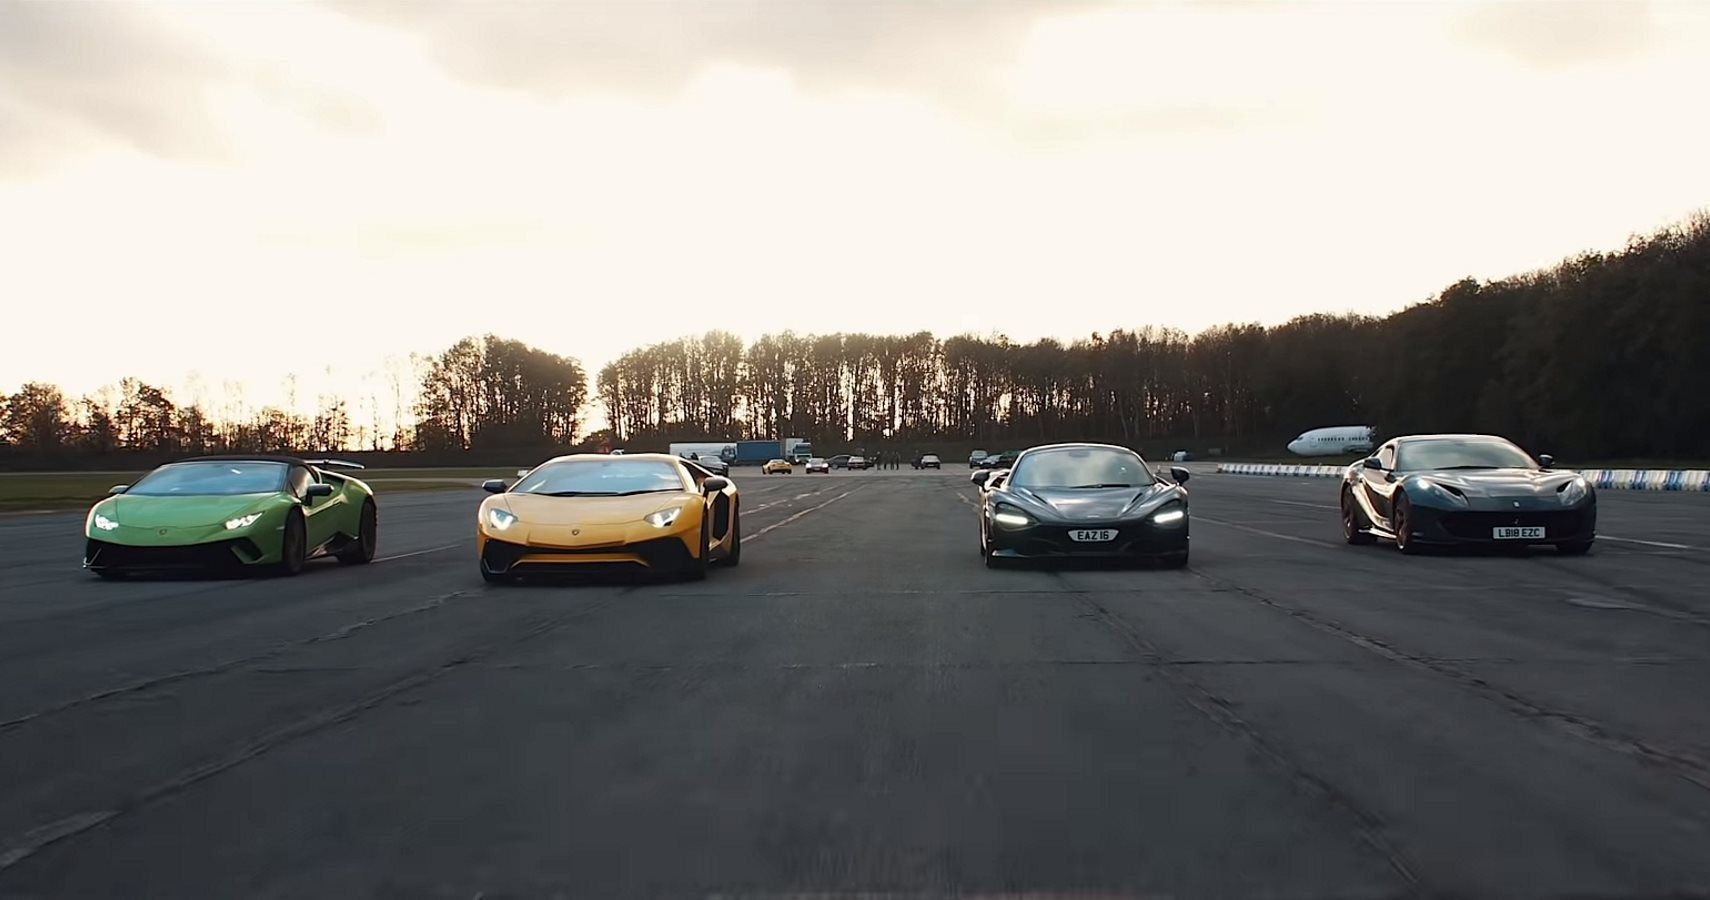 Watch A Slew Of Supercars Take Each Other On In Epic Drag Race